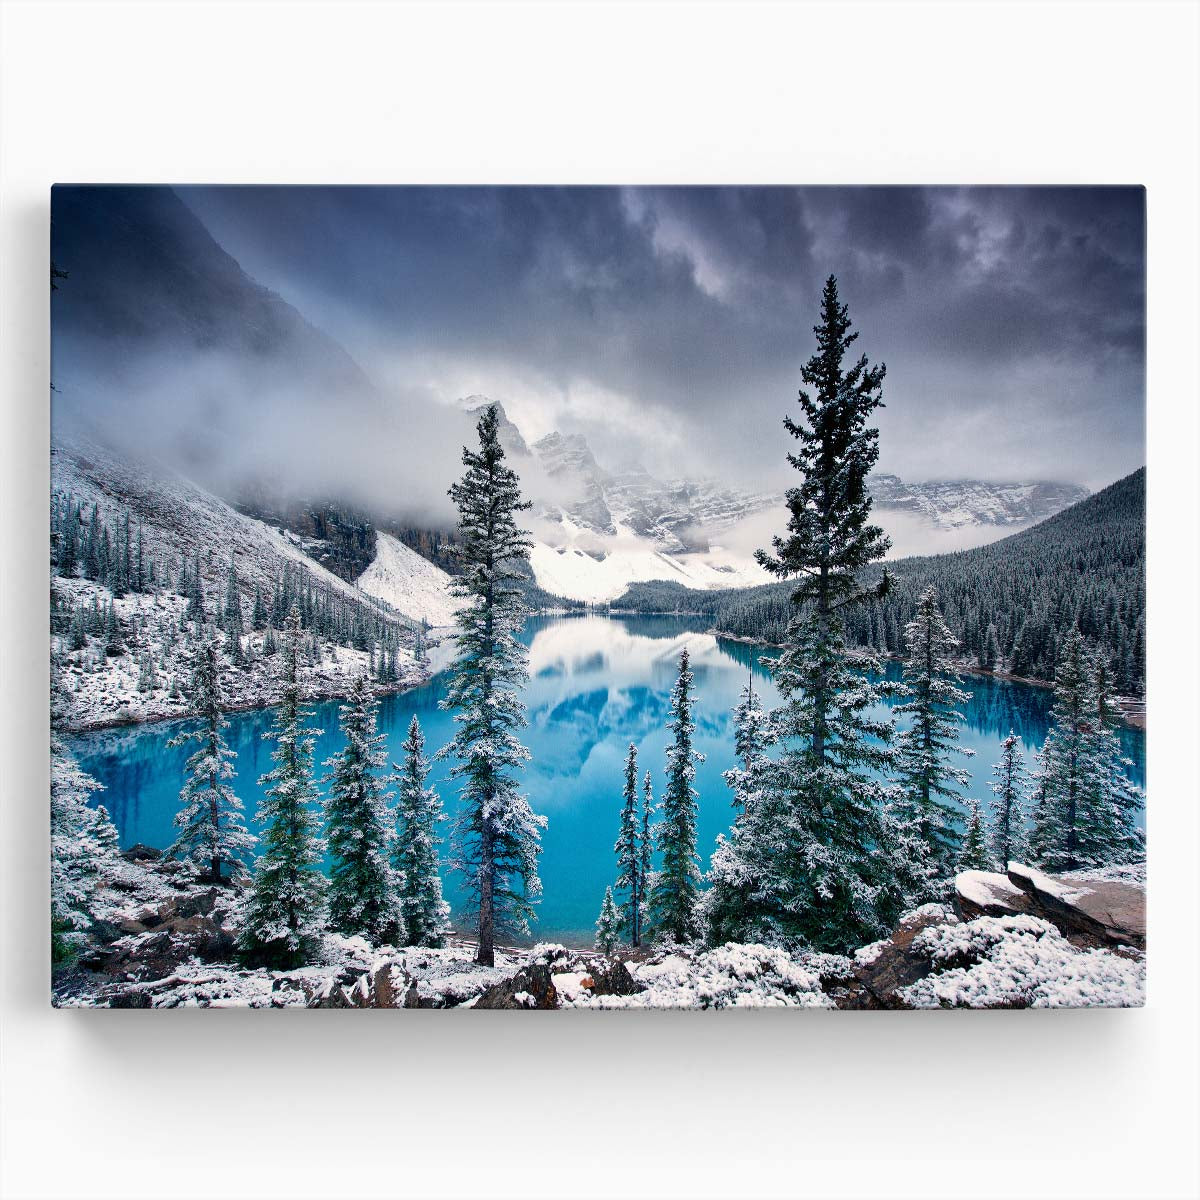 Moraine Lake Winter Wonderland Alpine Forest Photography Wall Art by Luxuriance Designs. Made in USA.